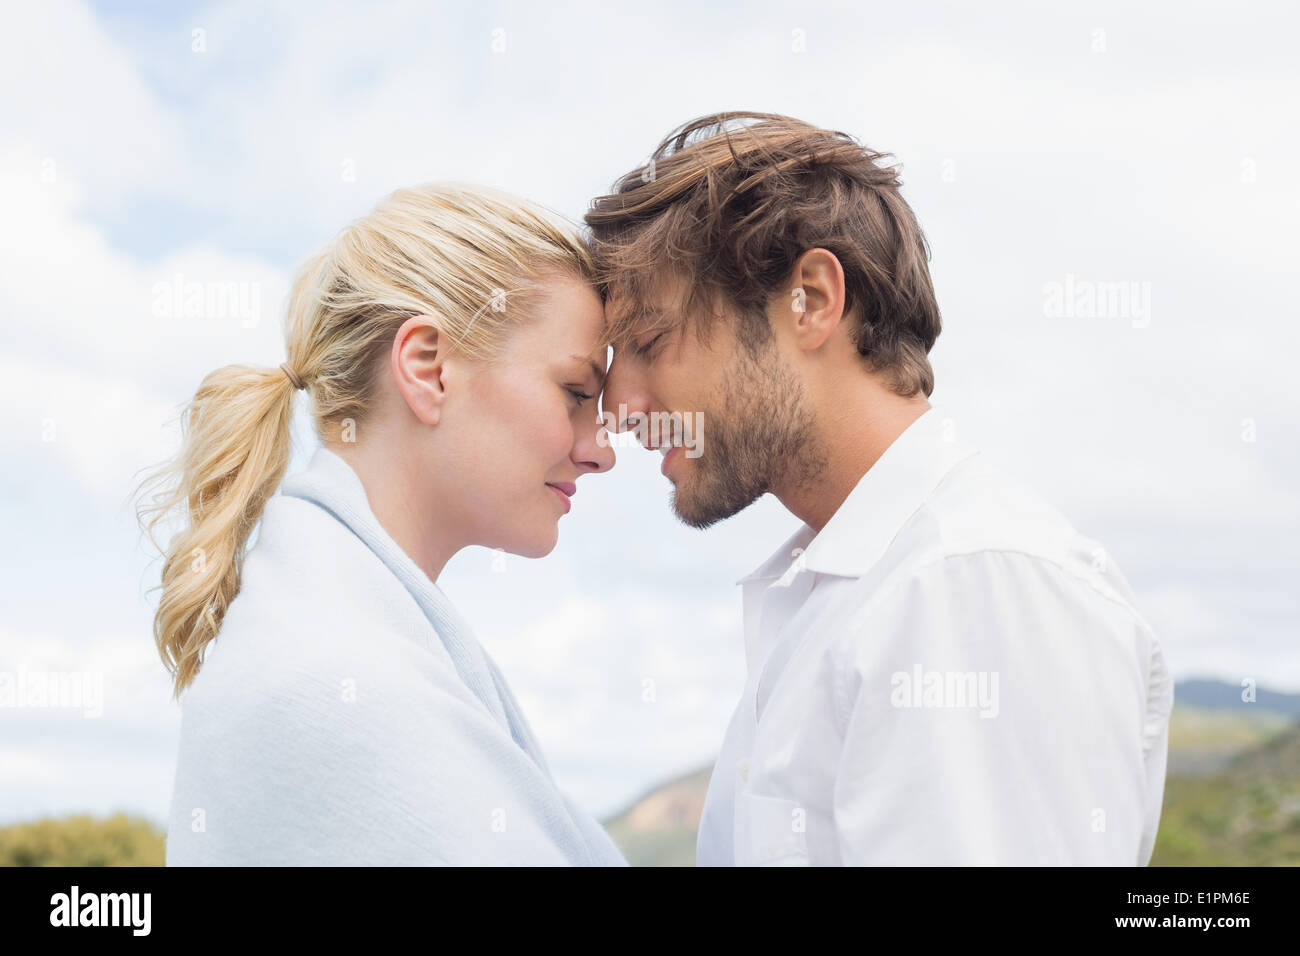 Cute smiling couple standing outside facing each other Stock Photo